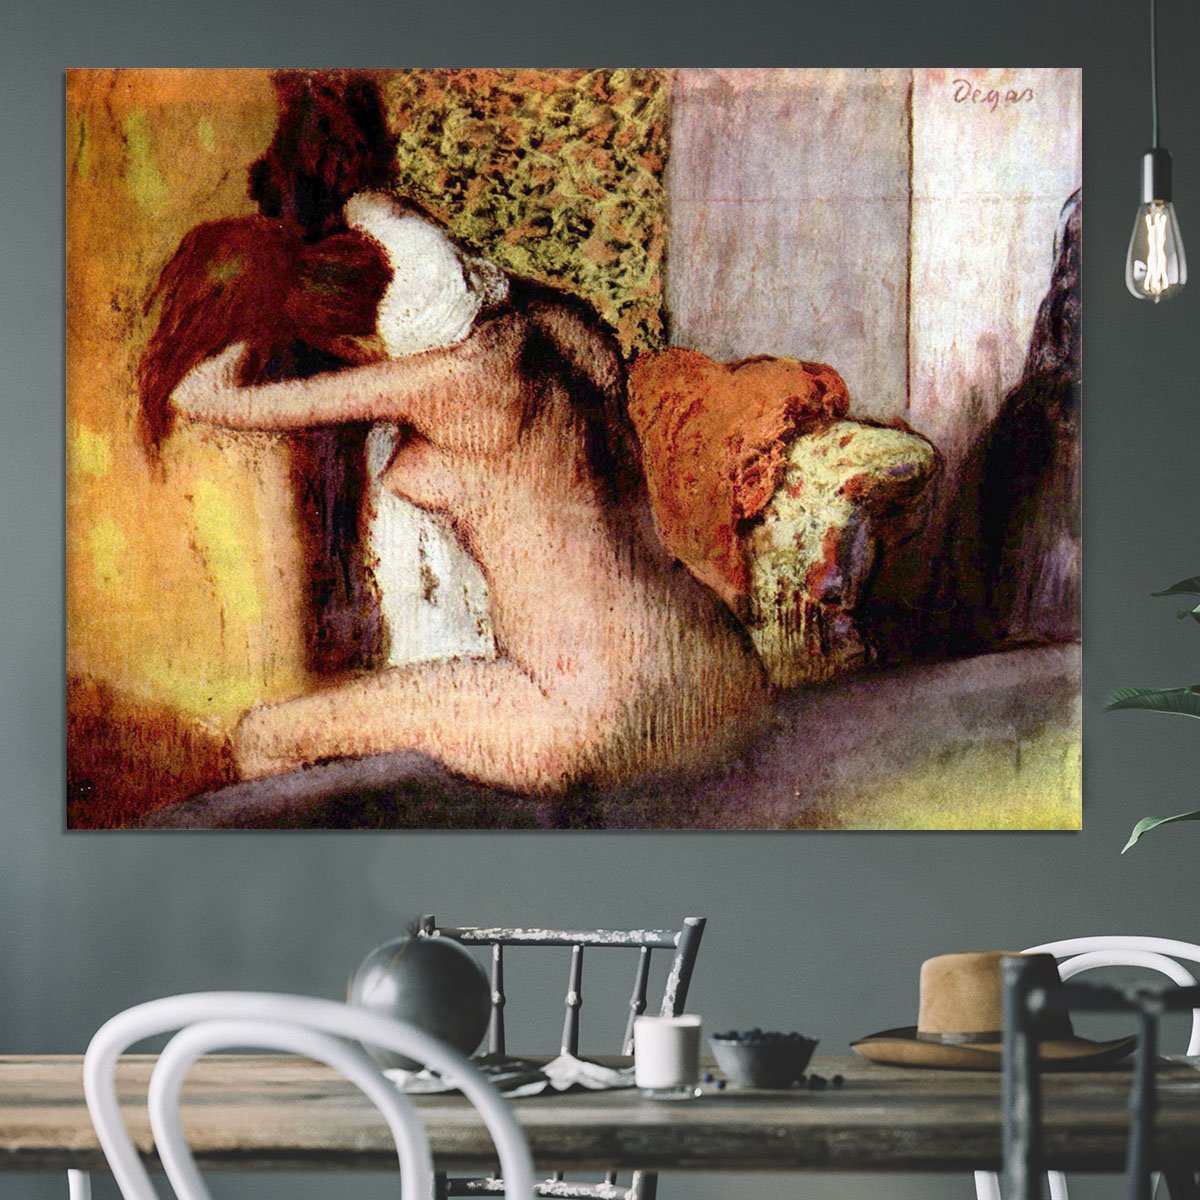 After bathing 2 by Degas Canvas Print or Poster